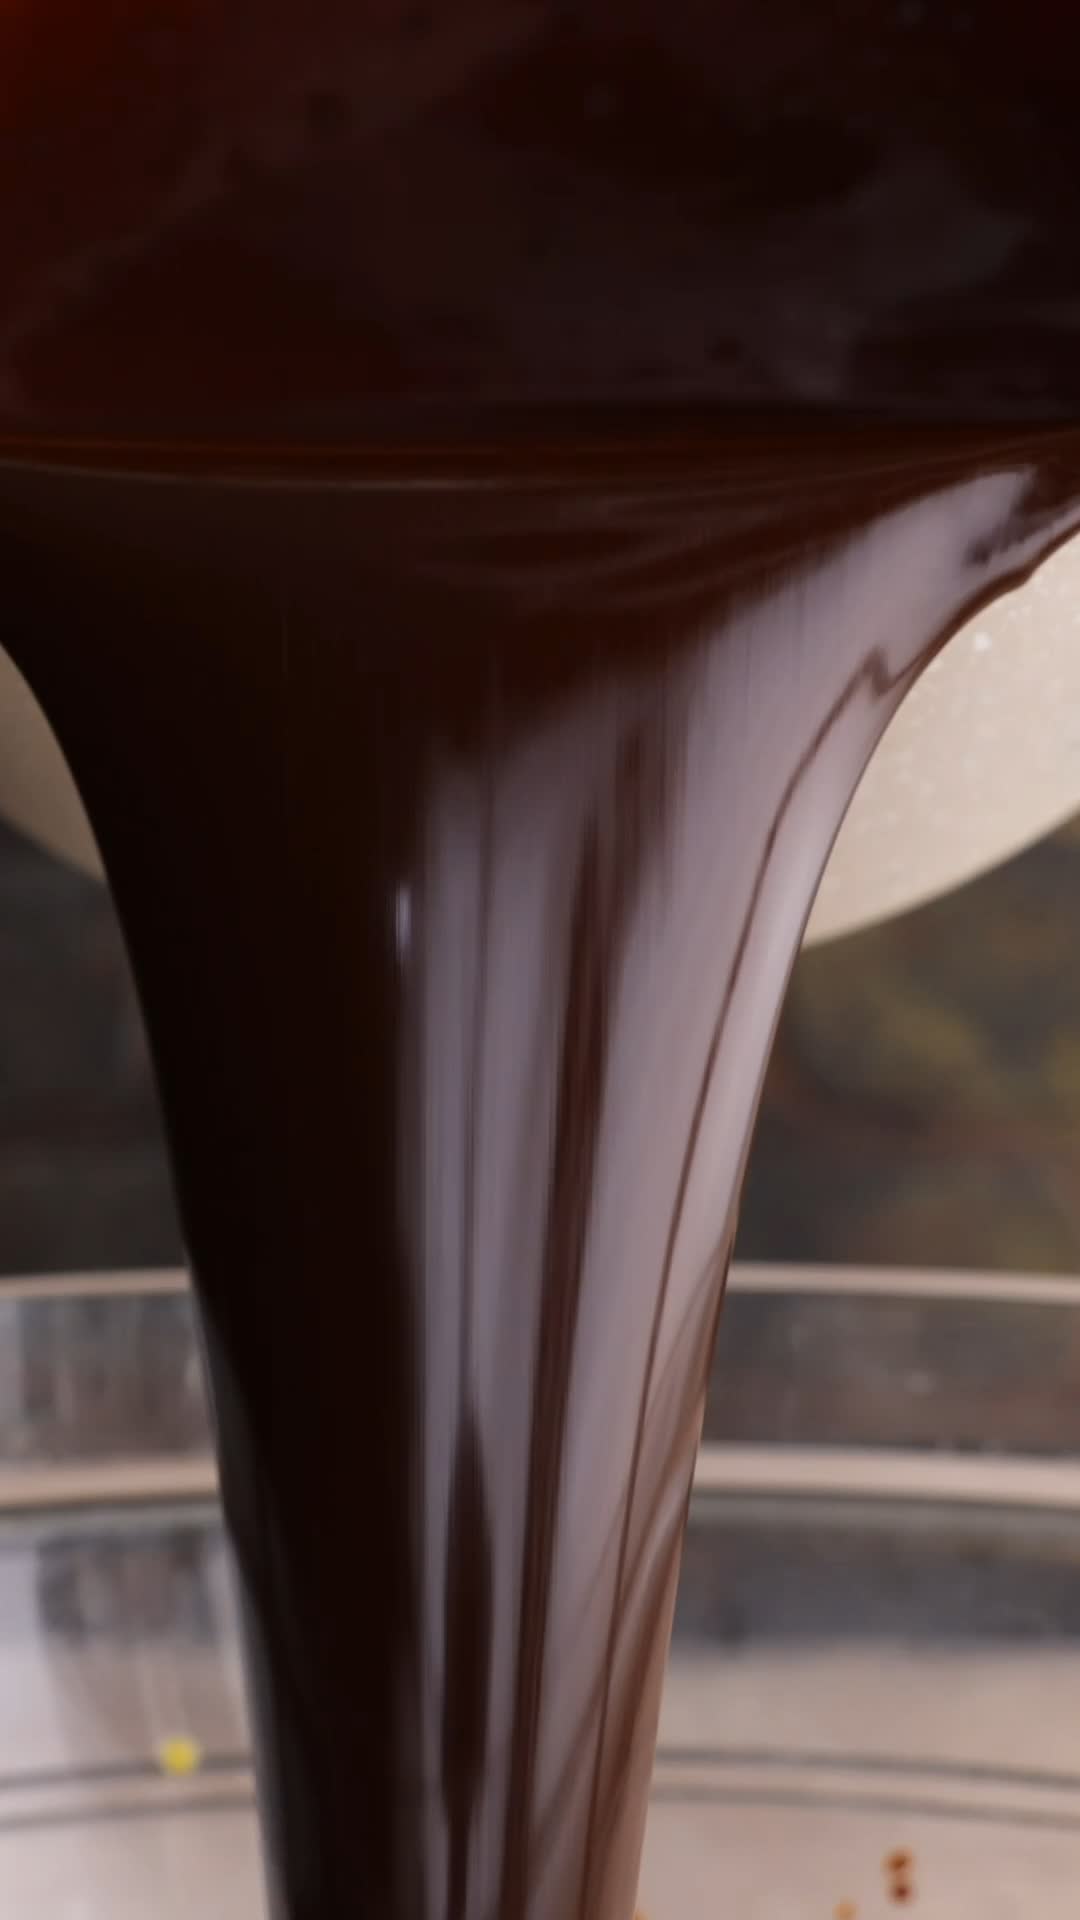 Smooth chocolate mixture being poured into a bowl